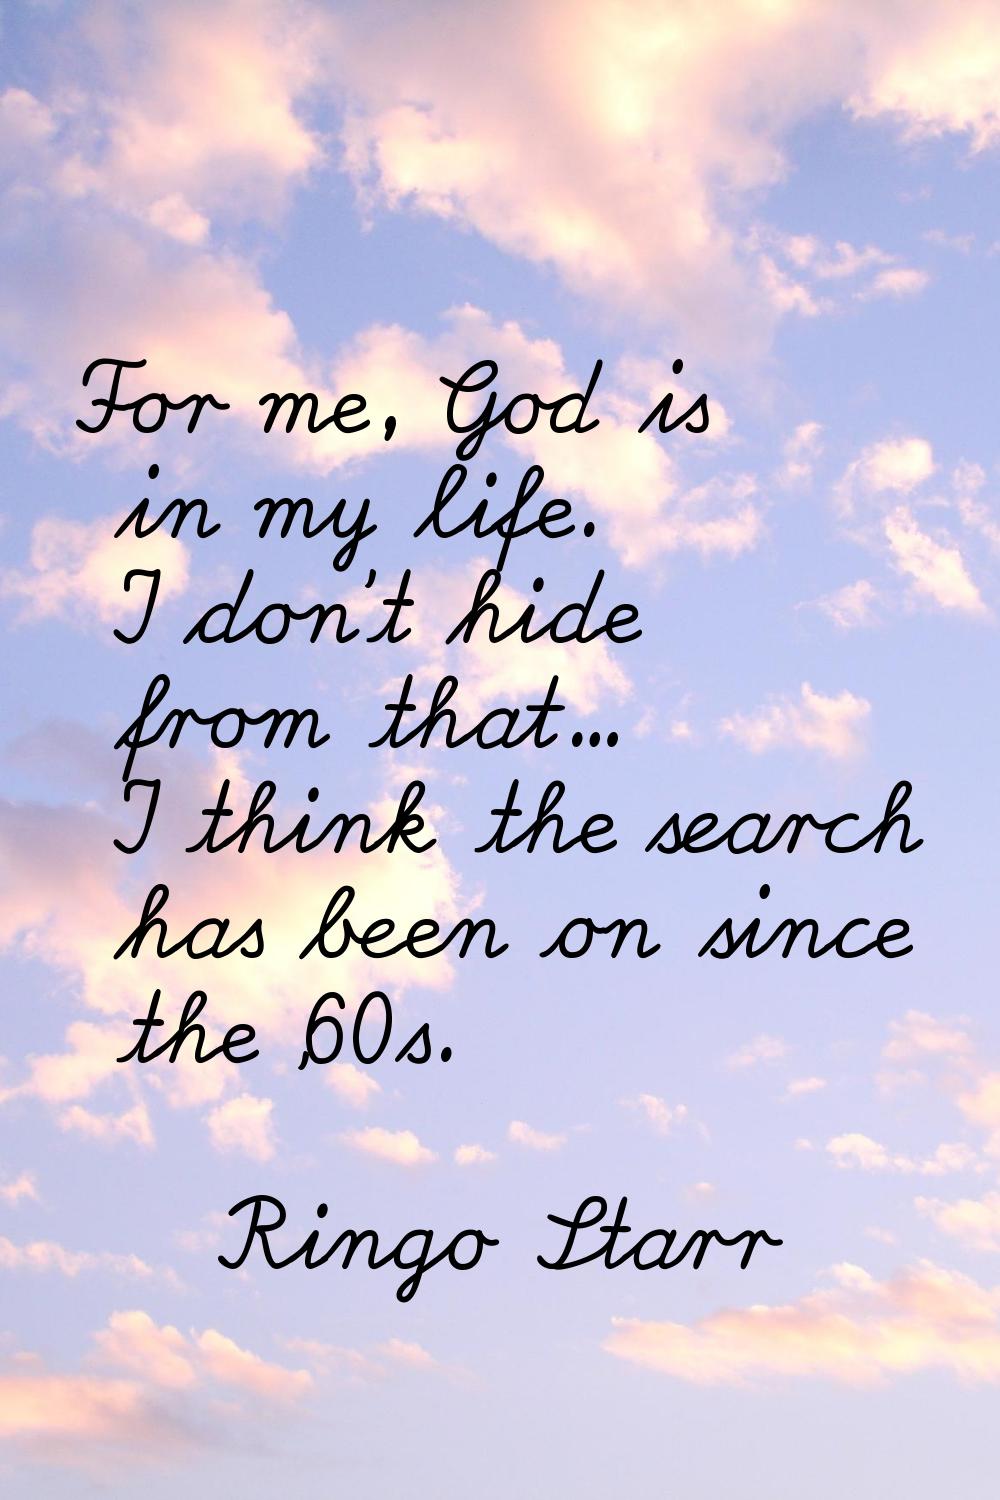 For me, God is in my life. I don't hide from that... I think the search has been on since the '60s.